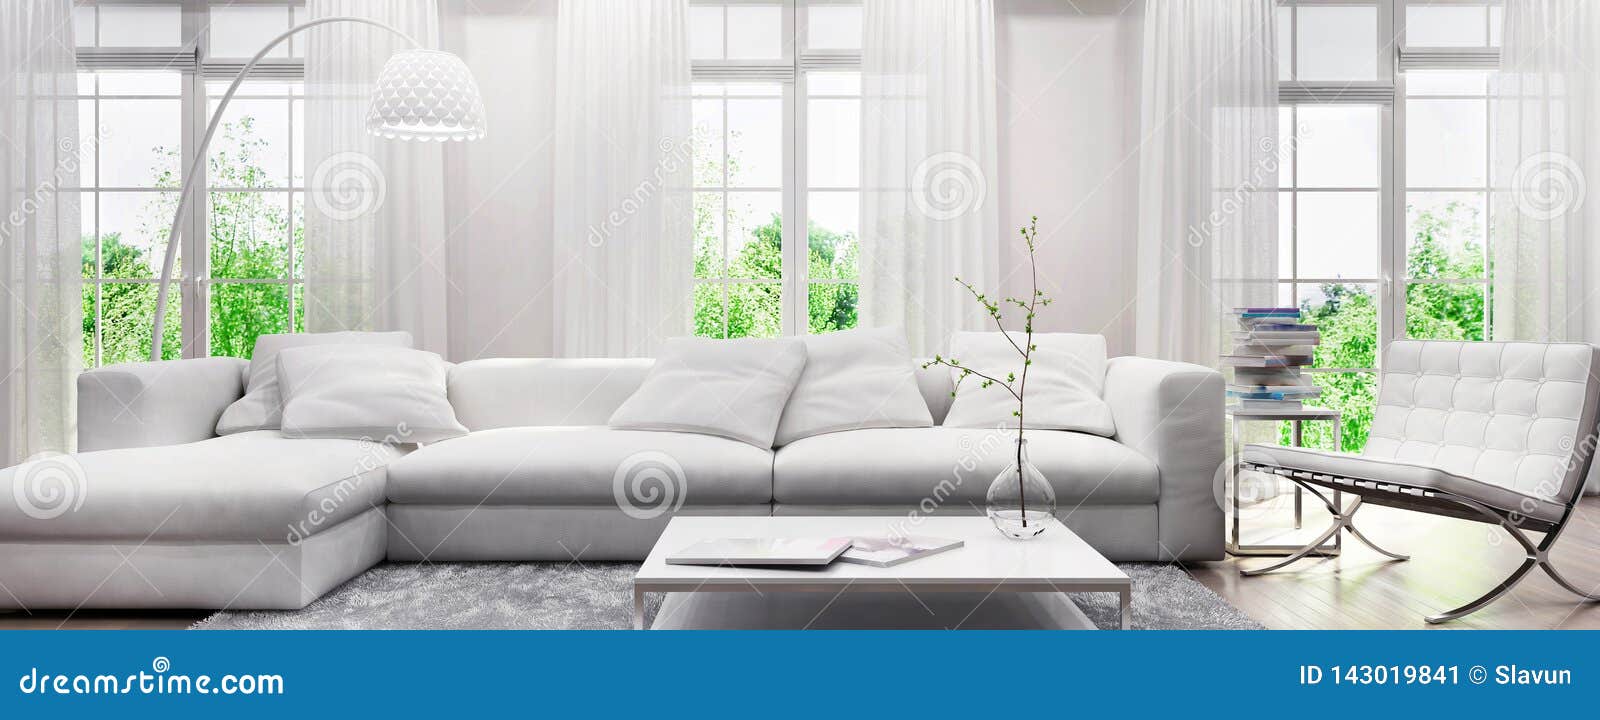 modern white interior with a sofa and large windows